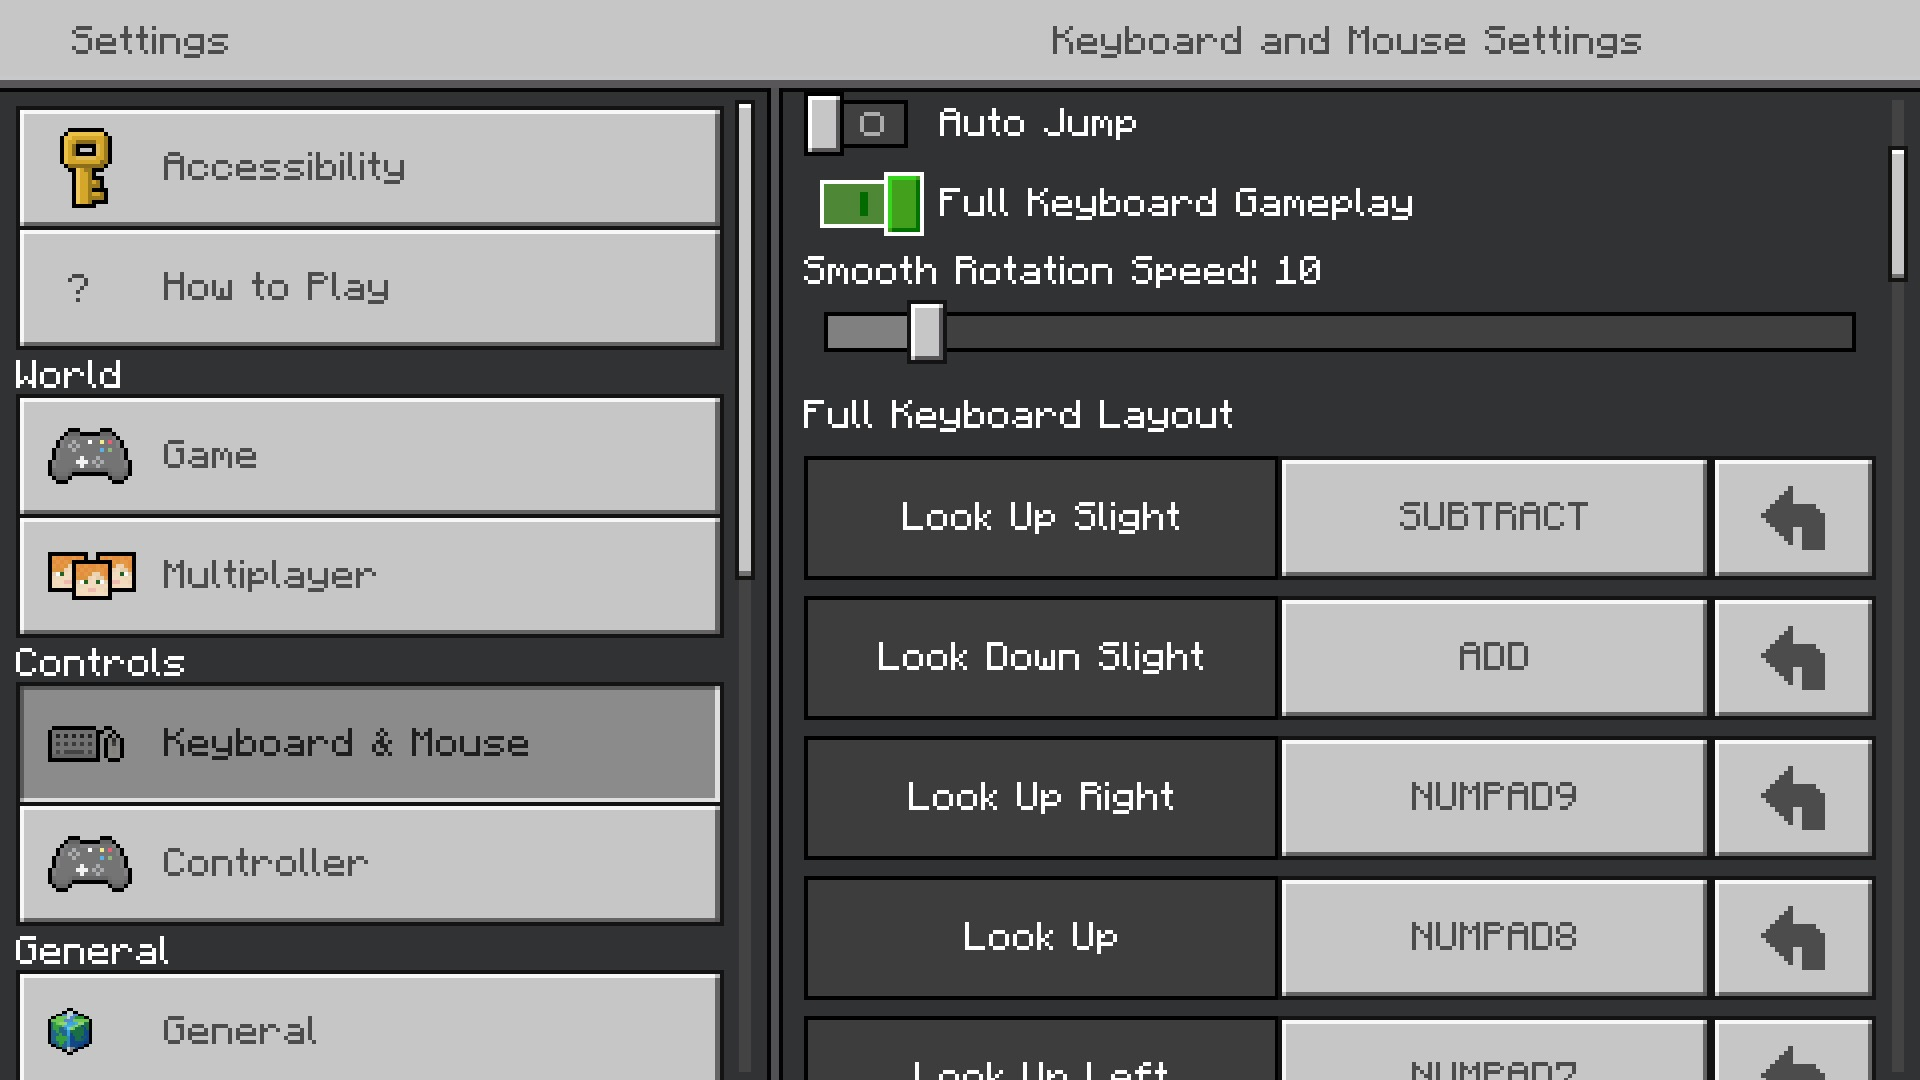 Screenshot of Minecraft game settings which shows the Keyboard and Mouse Settings with Full Keyboard Gameplay toggled on. 